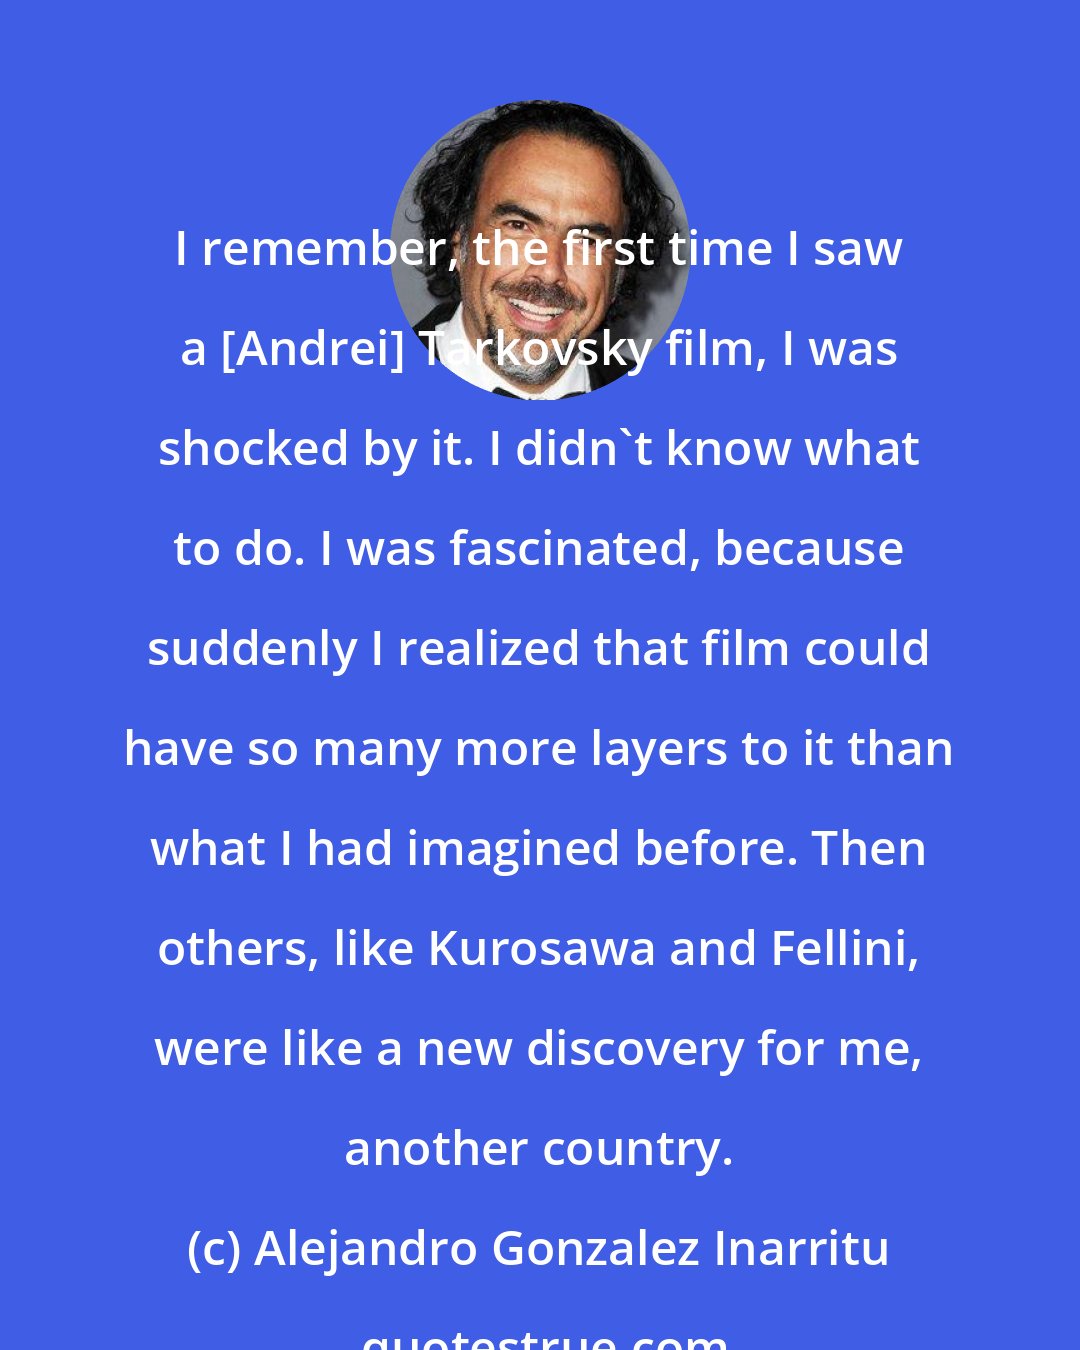 Alejandro Gonzalez Inarritu: I remember, the first time I saw a [Andrei] Tarkovsky film, I was shocked by it. I didn't know what to do. I was fascinated, because suddenly I realized that film could have so many more layers to it than what I had imagined before. Then others, like Kurosawa and Fellini, were like a new discovery for me, another country.